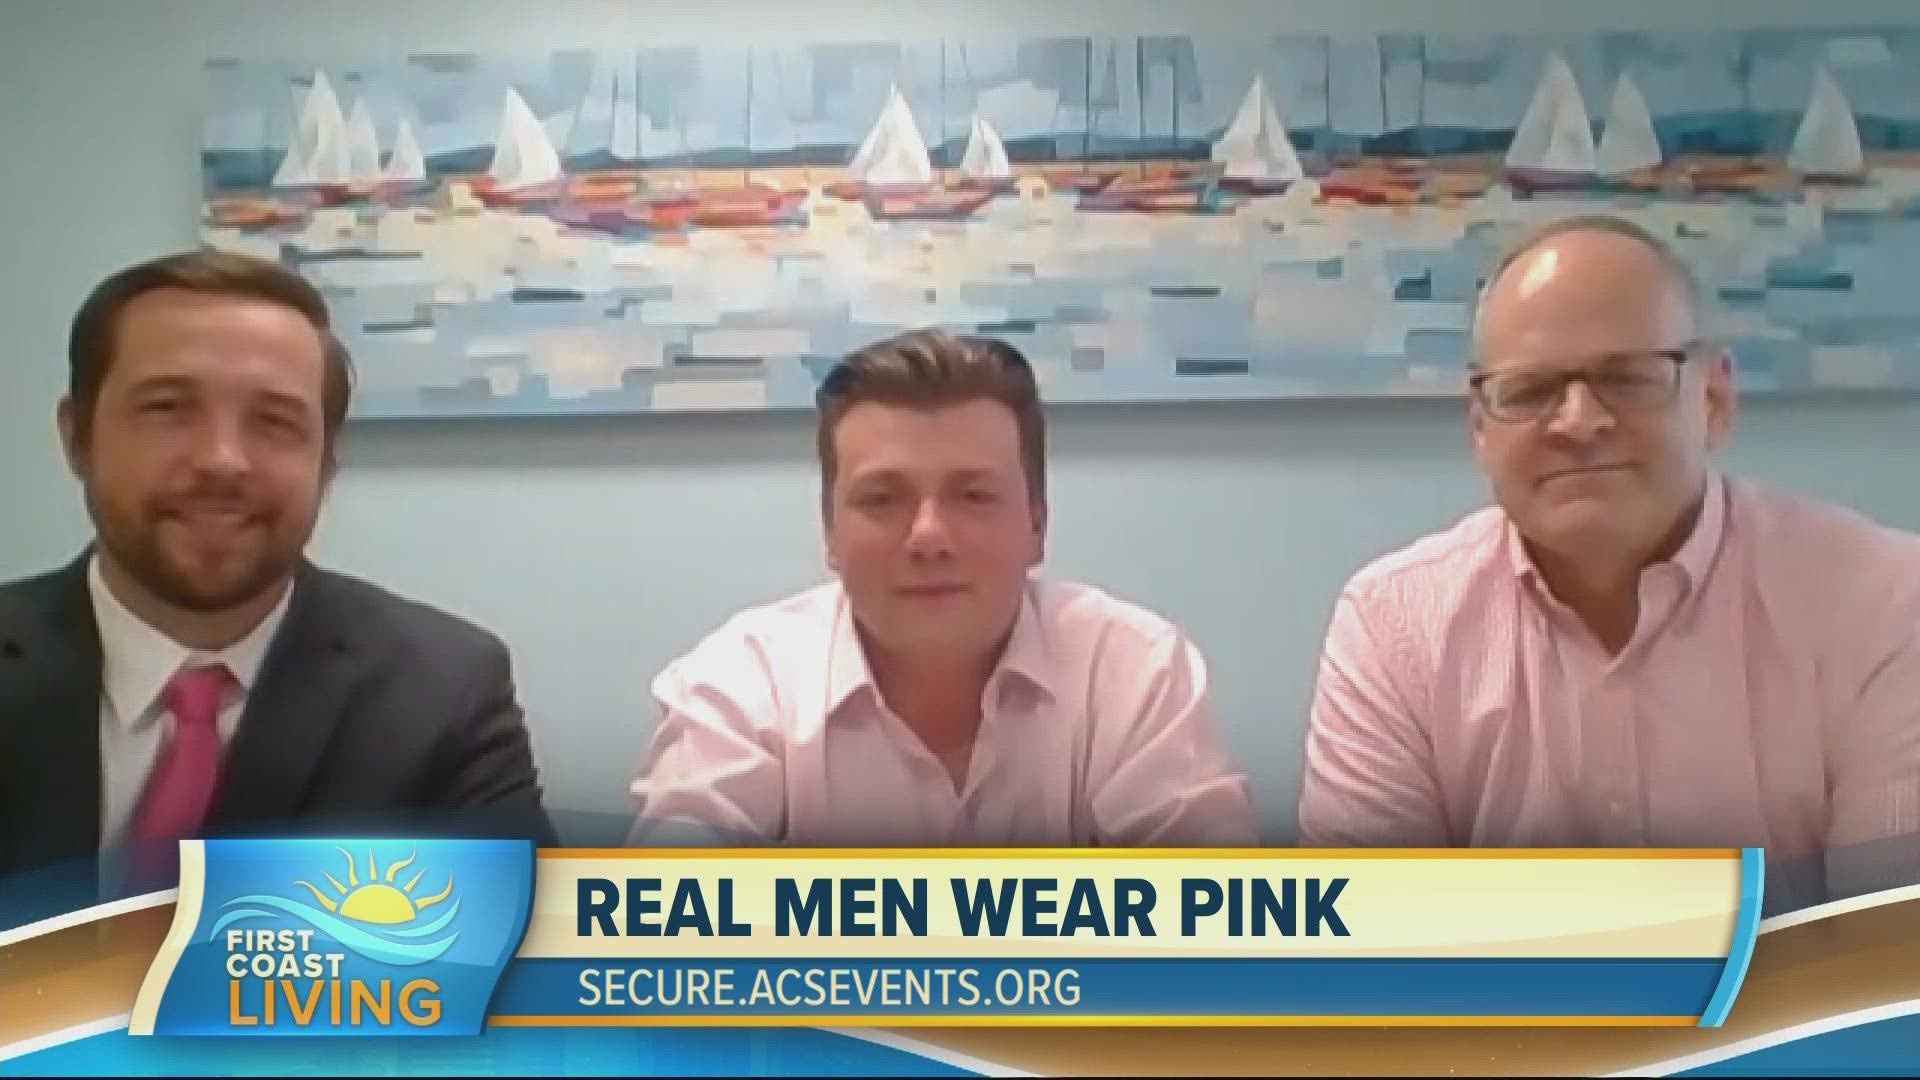 Real Men Wear Pink is an affiliate of the American Cancer society. It's raised over $500,000 since 2016 to fund breast cancer research.